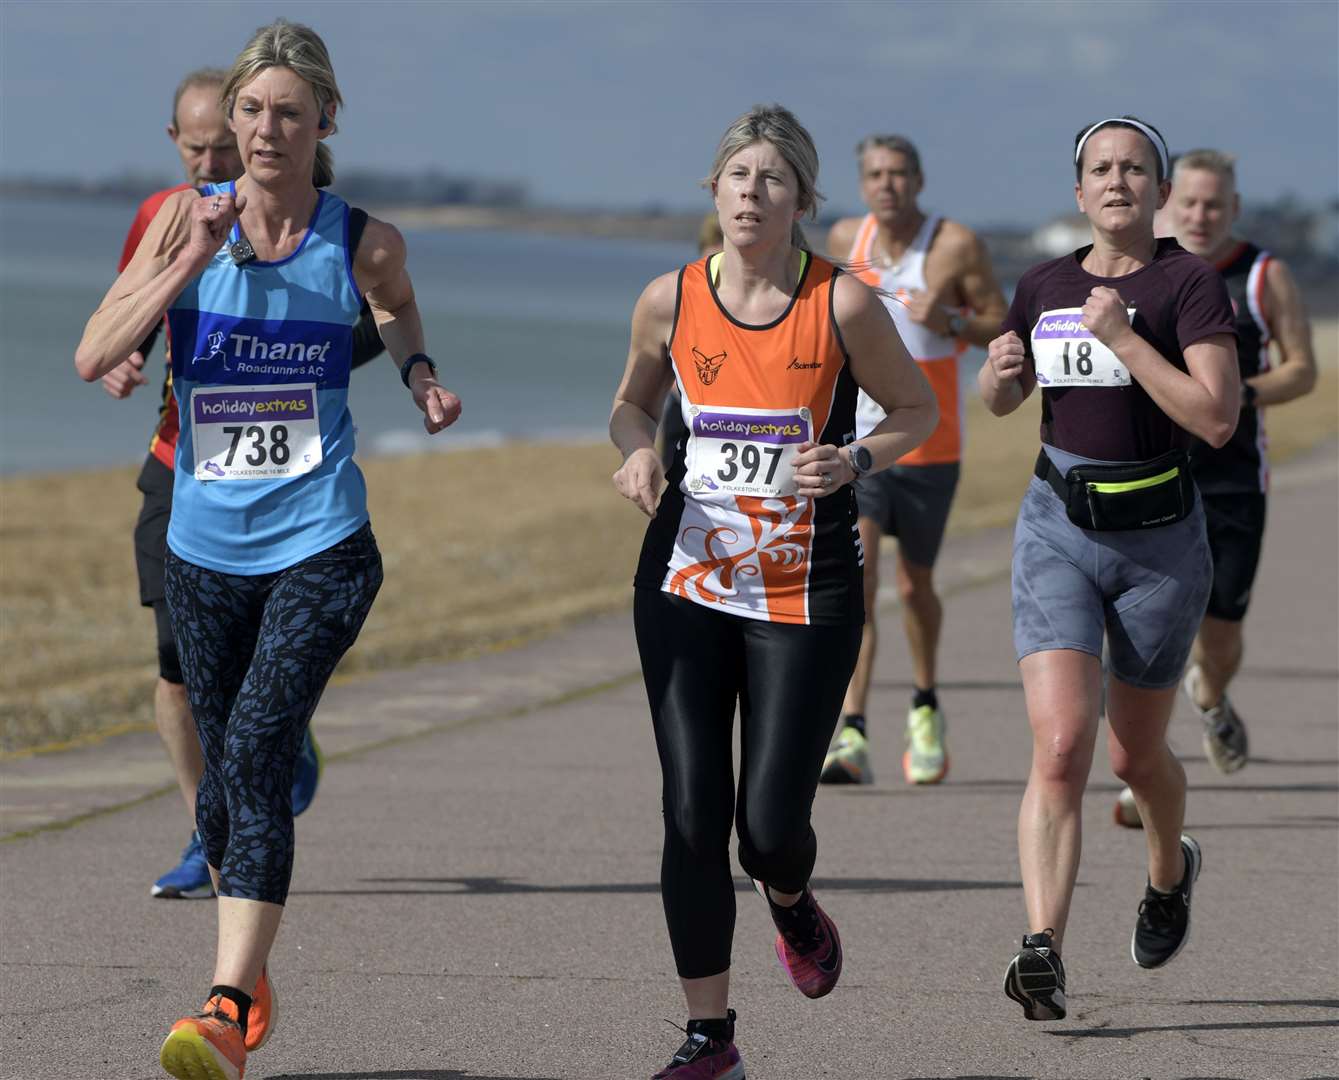 No.738 Julie Williams of Thanet Roadrunners, No.397 Bronwen Lafferty and No.18 Laura Archer make their way along the seafront at Hythe. Picture: Barry Goodwin (63468716)